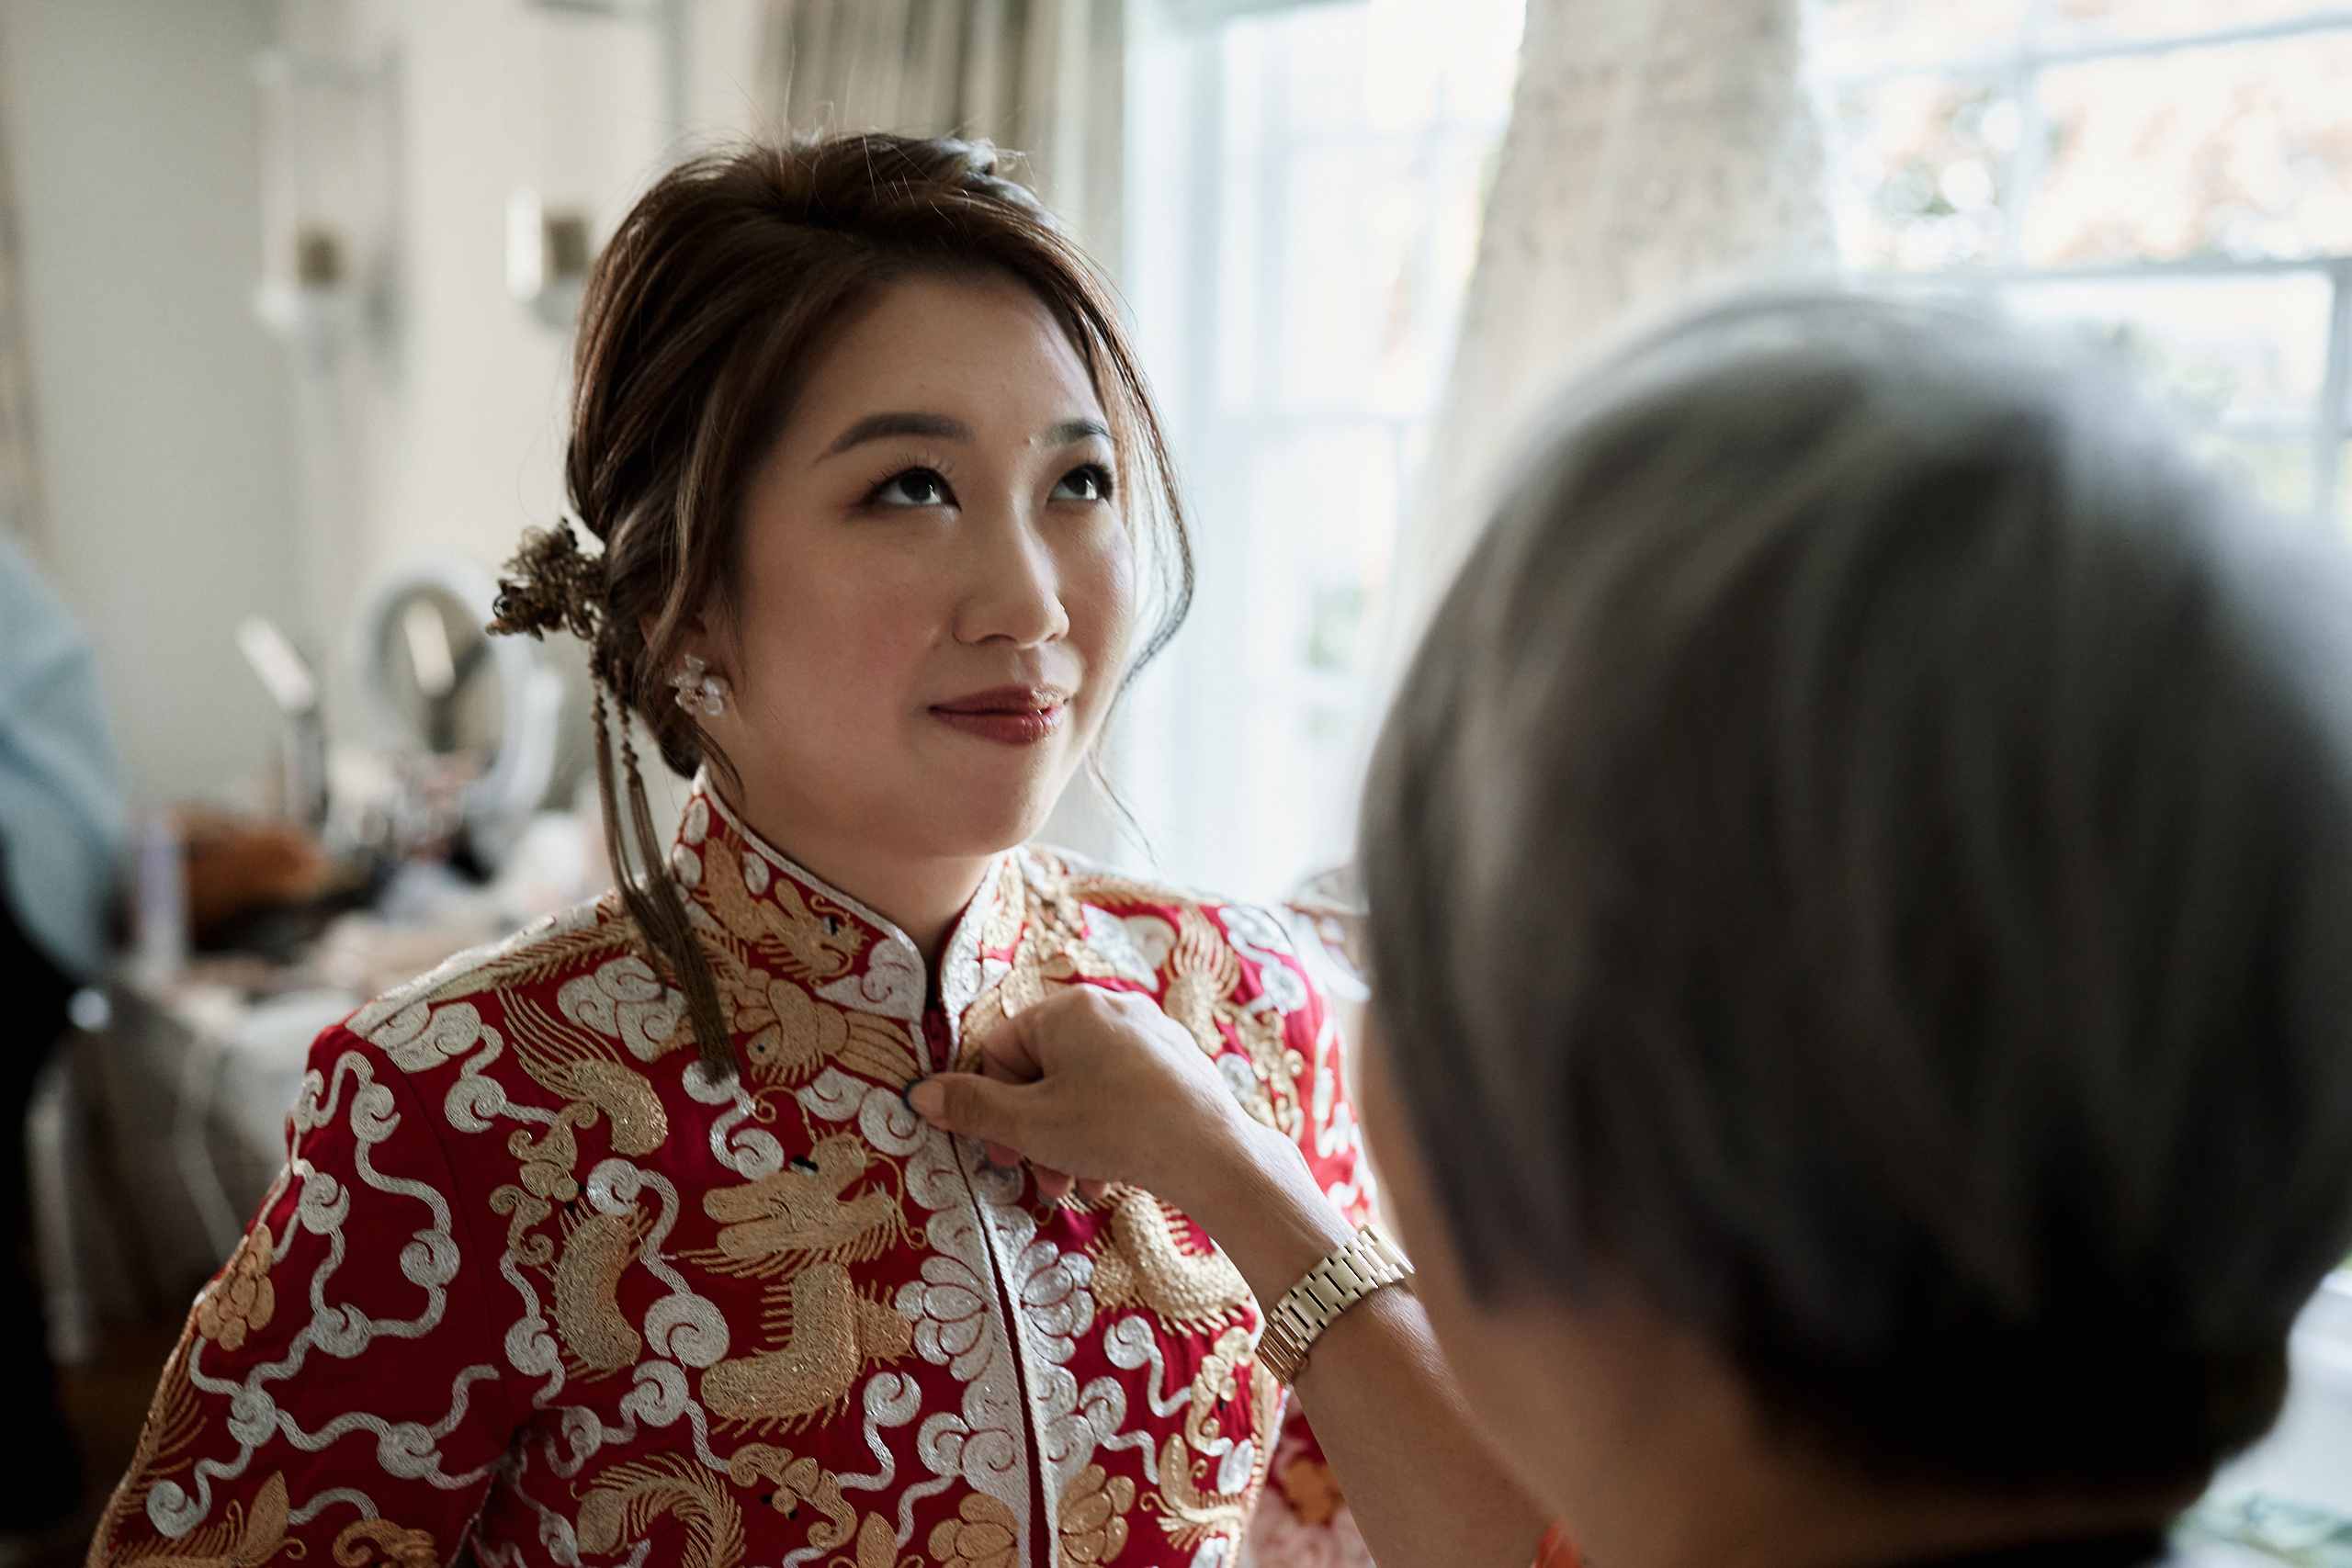 A lady in a red Chinese outfit is having her hair styled.